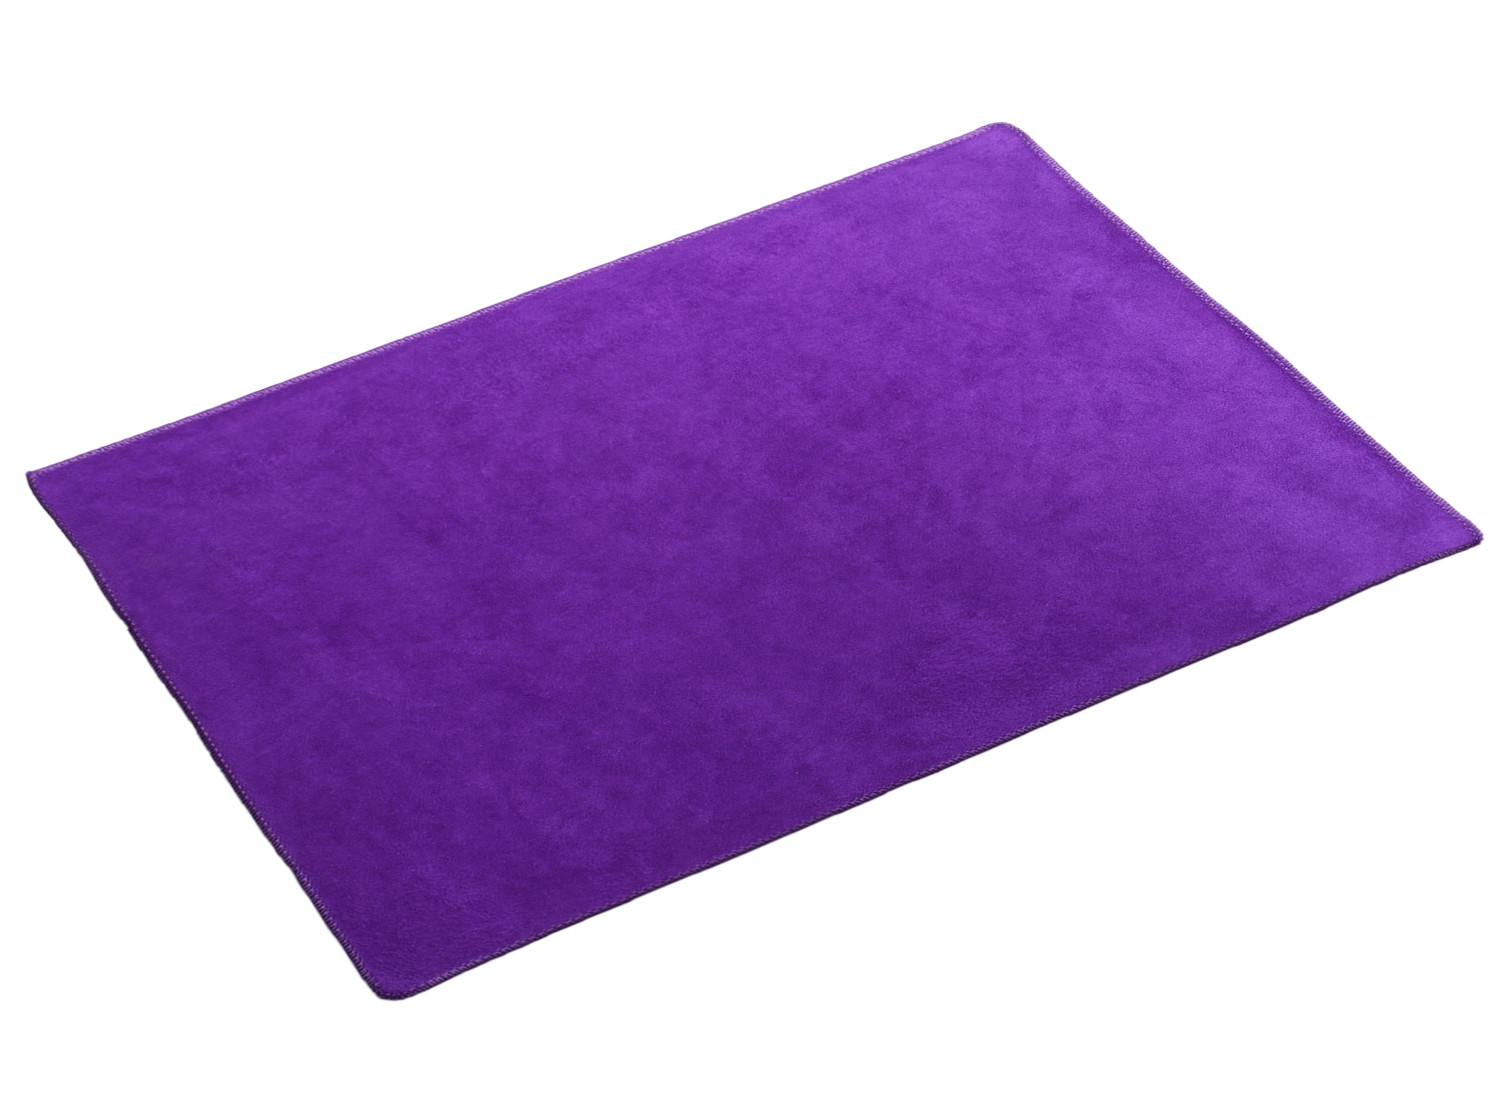 Kuber Industries Cleaning Cloths|Microfiber Highly Absorbent Wash Towels for Kitchen,Car,Window,24 x 16 Inch,Pack of 2 (Green & Purple)